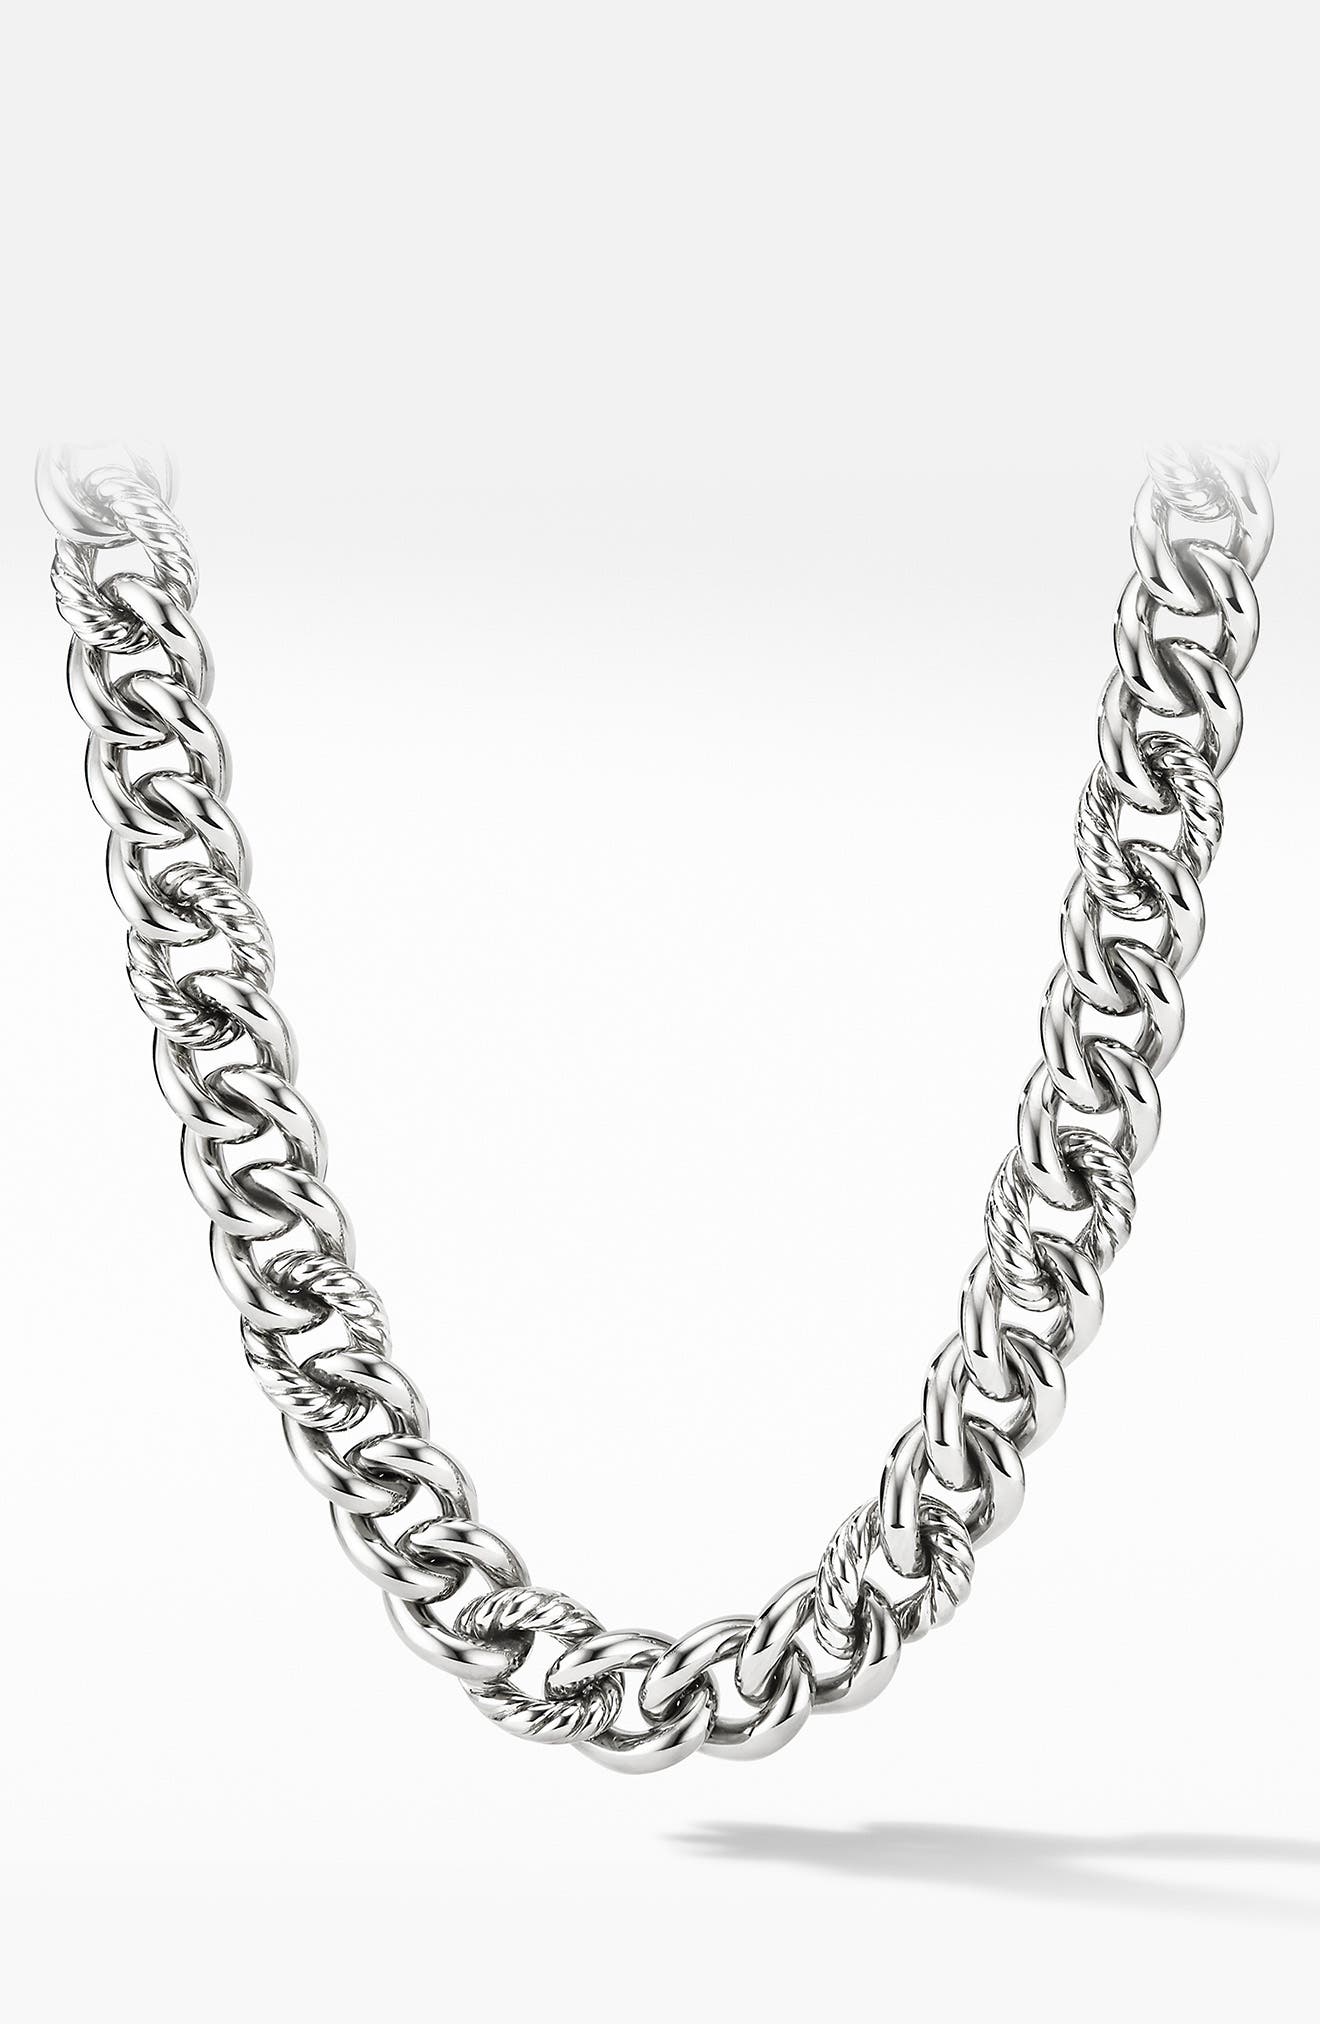 HEART clasp lace curb chains Silver sep BELLY CHAIN 